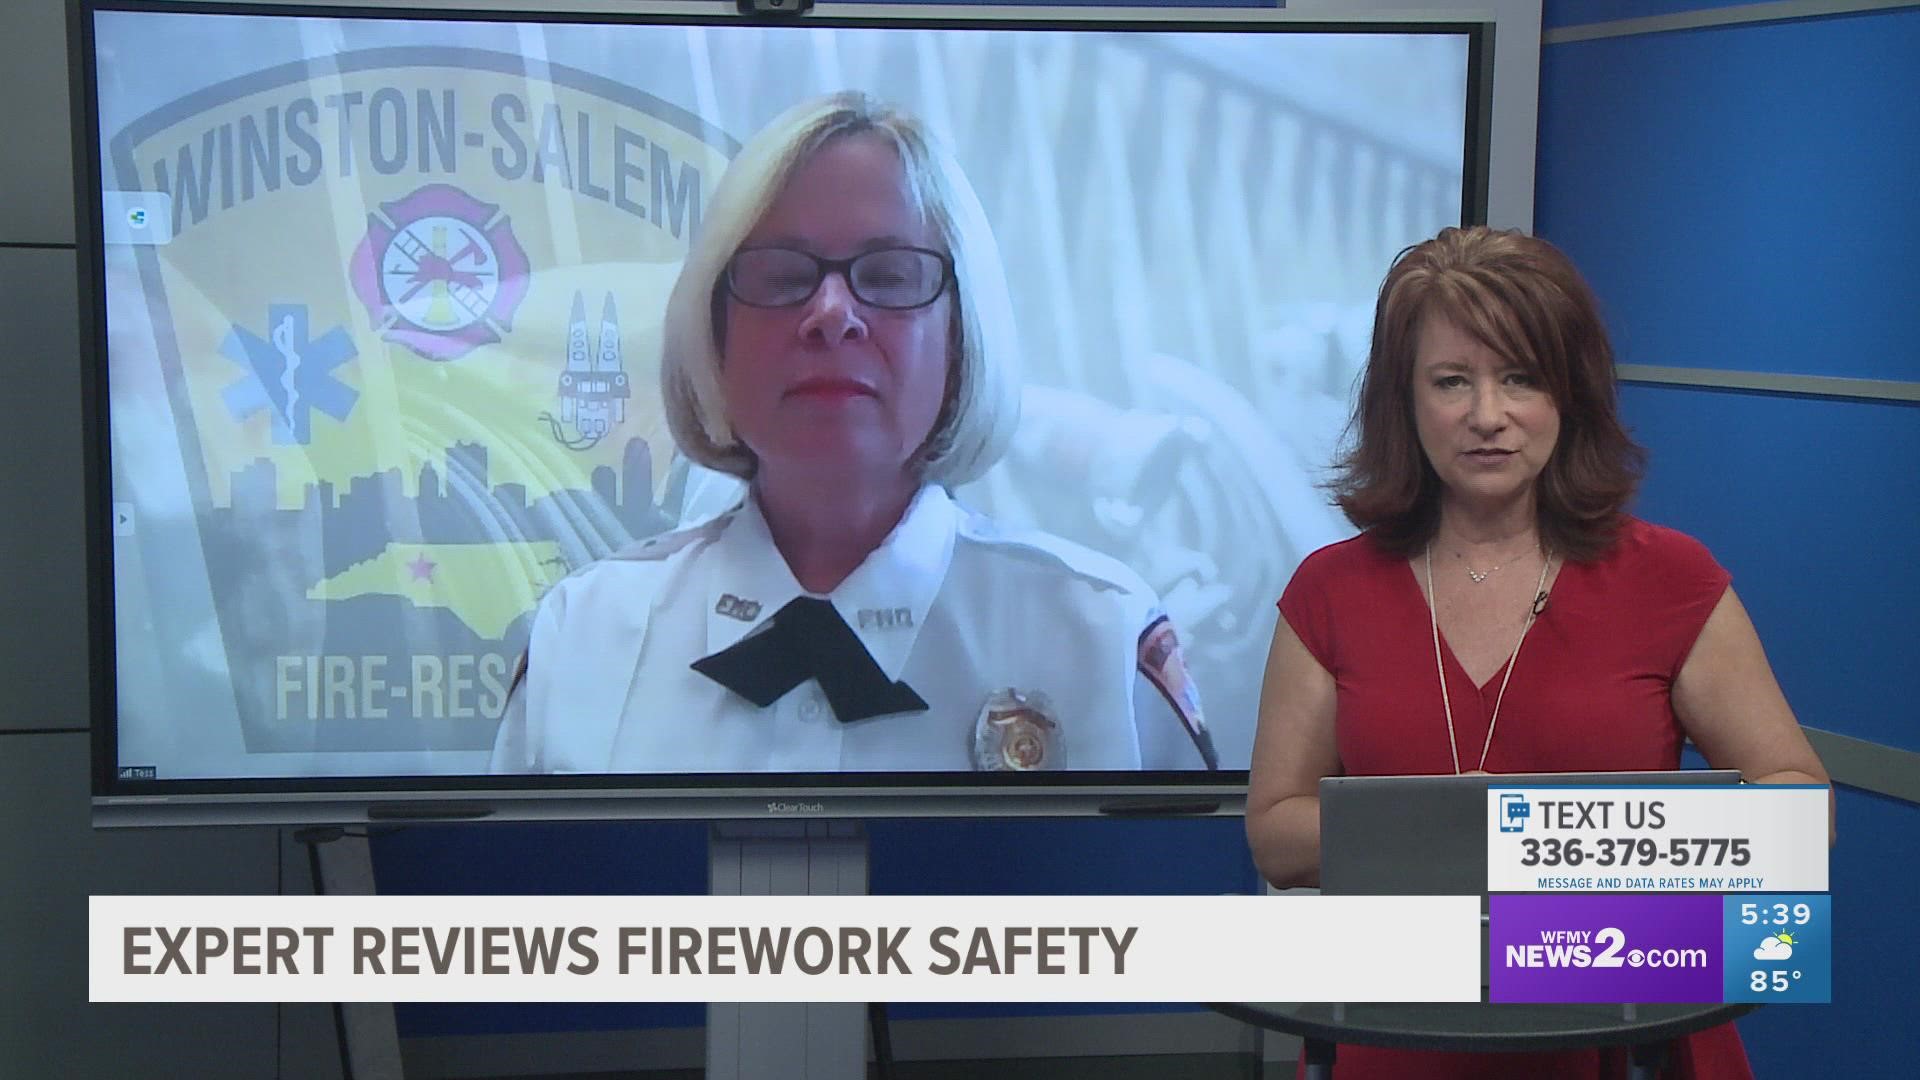 Theresa Knops from the Winston-Salem fire department explains how to handle fireworks safely.